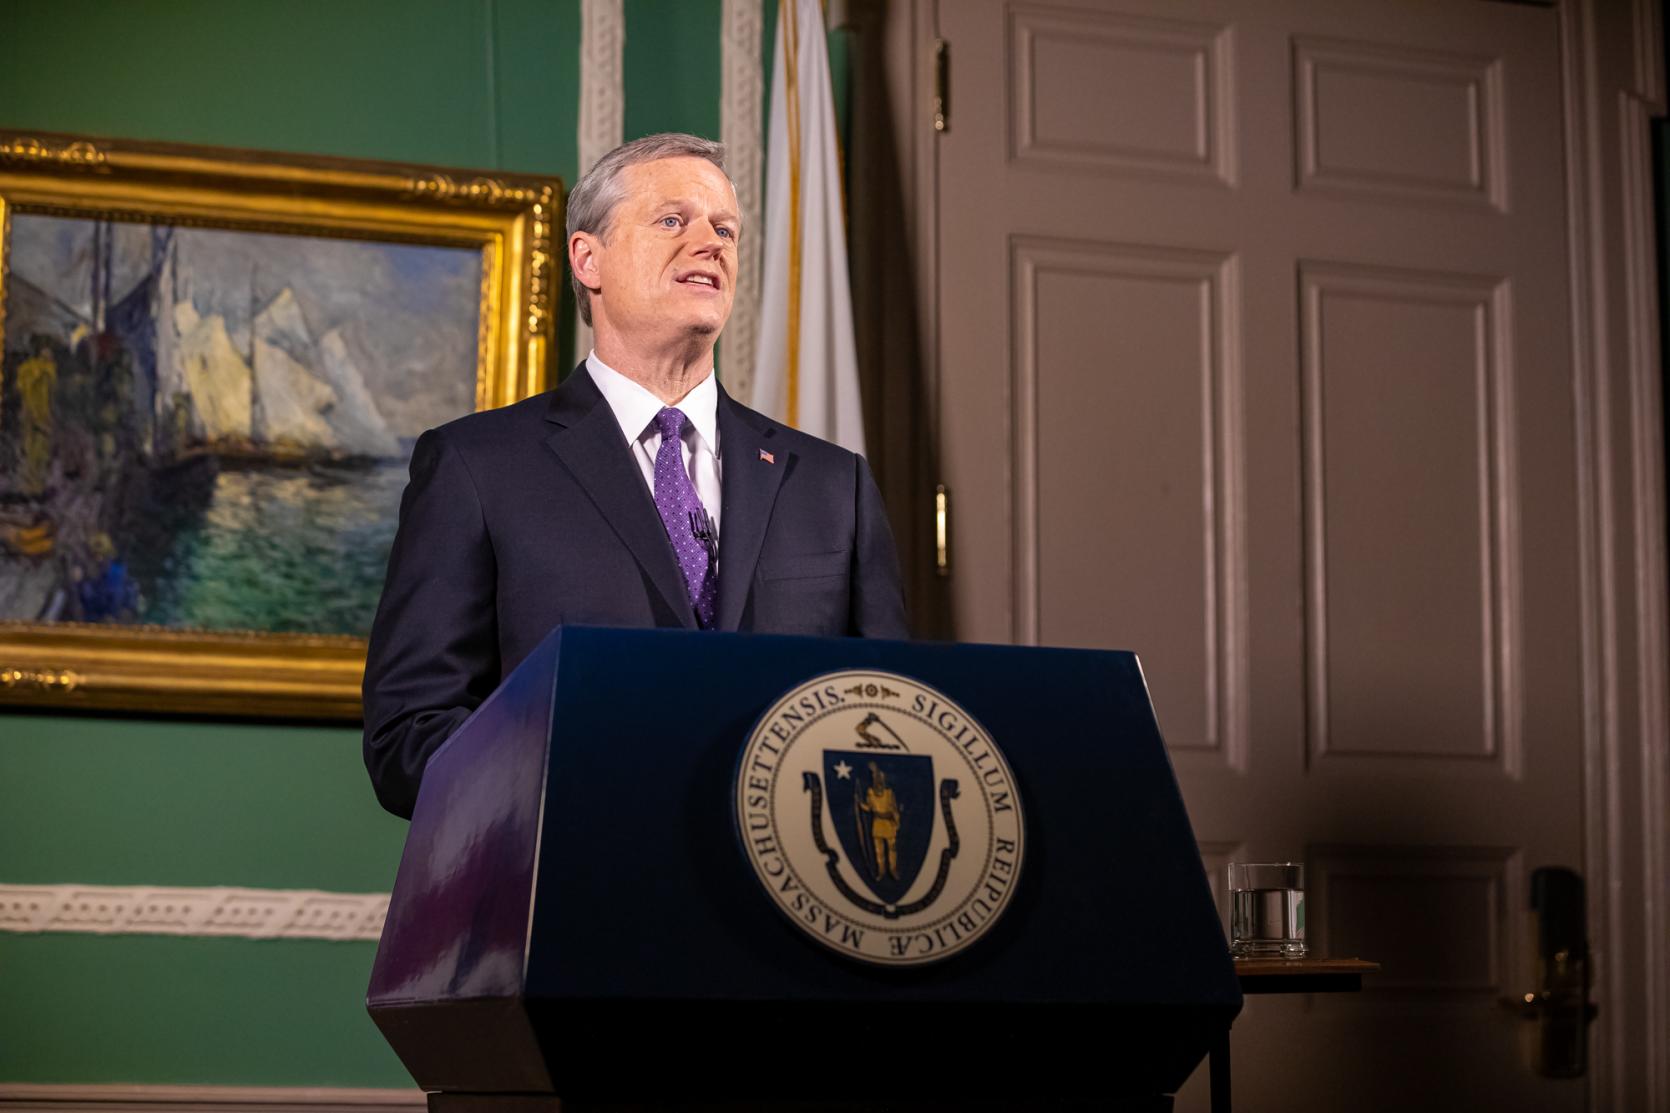 Governor Baker Delivers 2021 State of the Commonwealth Address